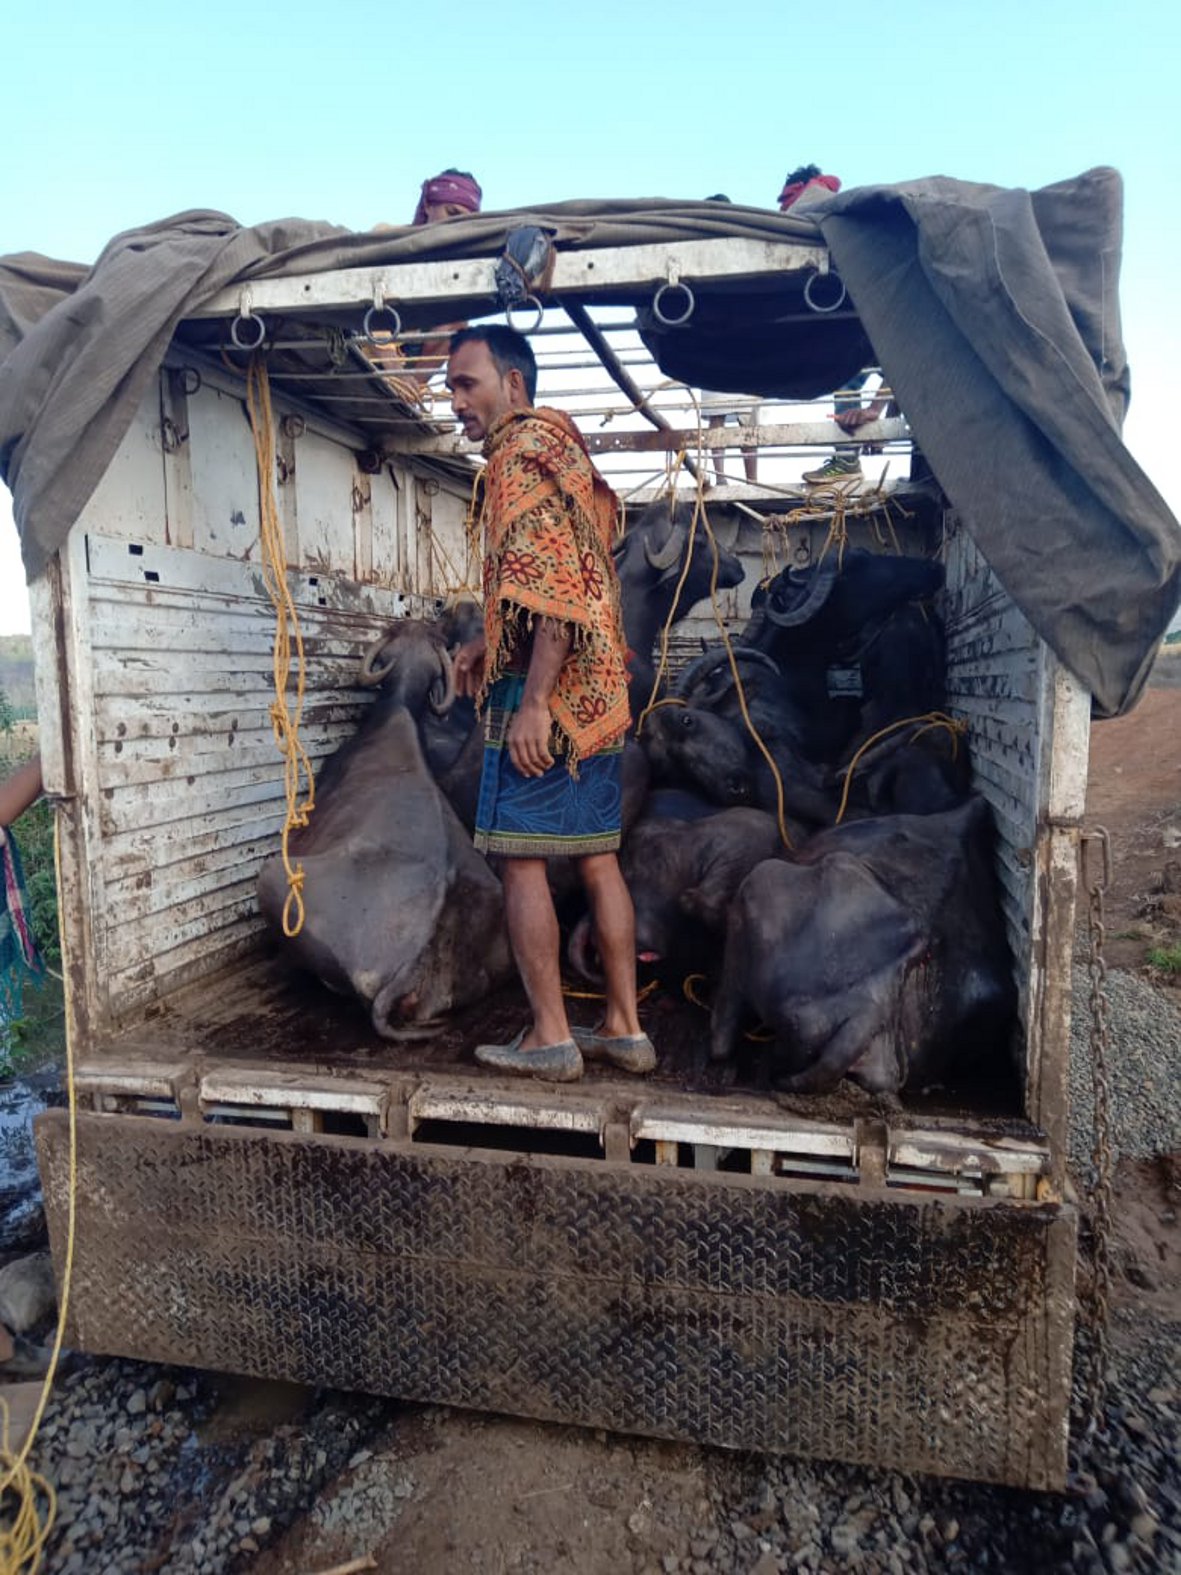 14 cattle were being transported in the vehicle